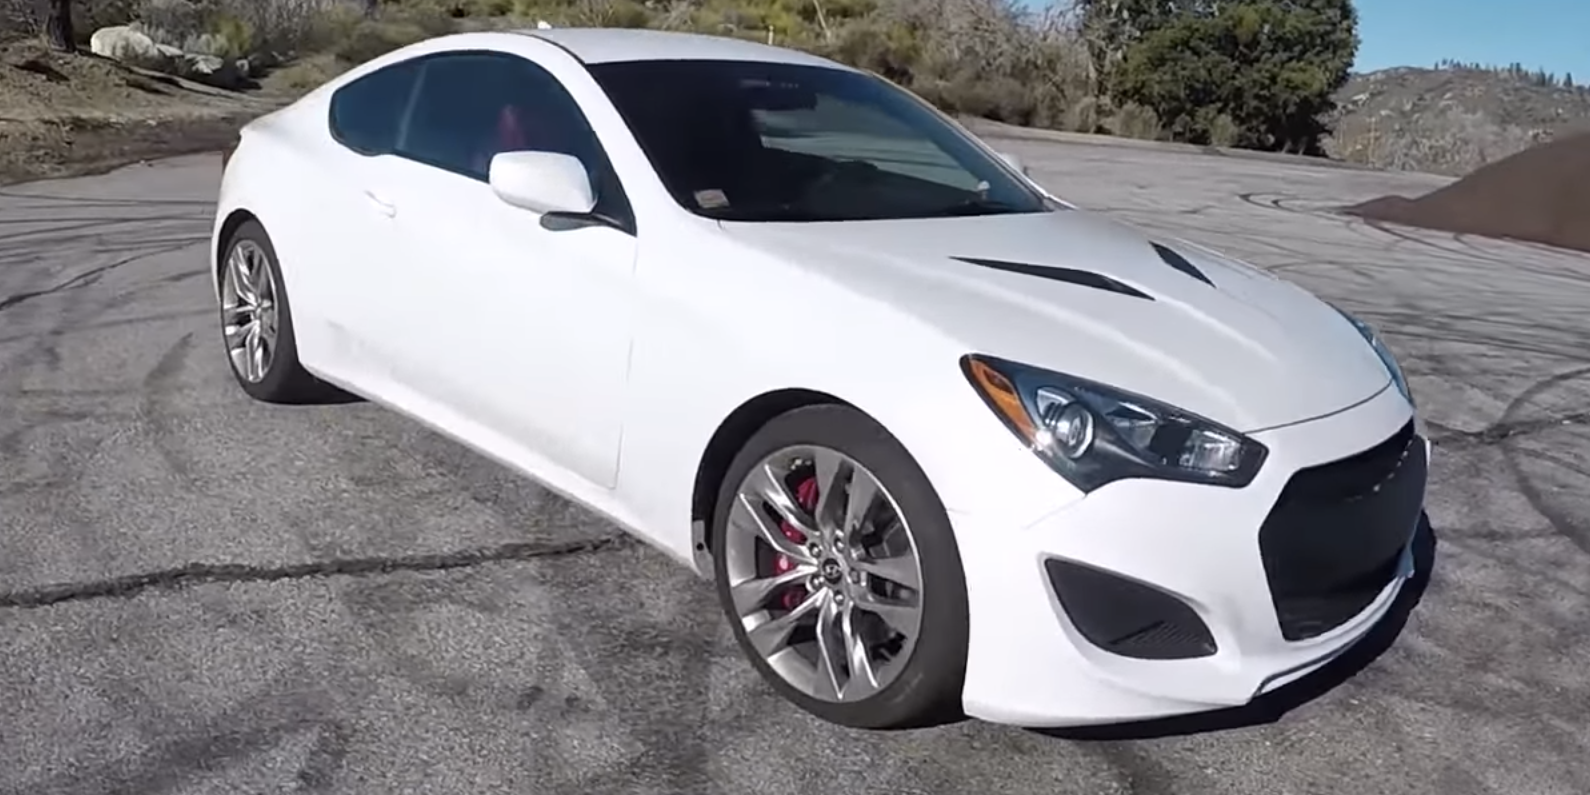 The Hyundai Genesis Coupe 2.0T Is an Overlooked Bargain